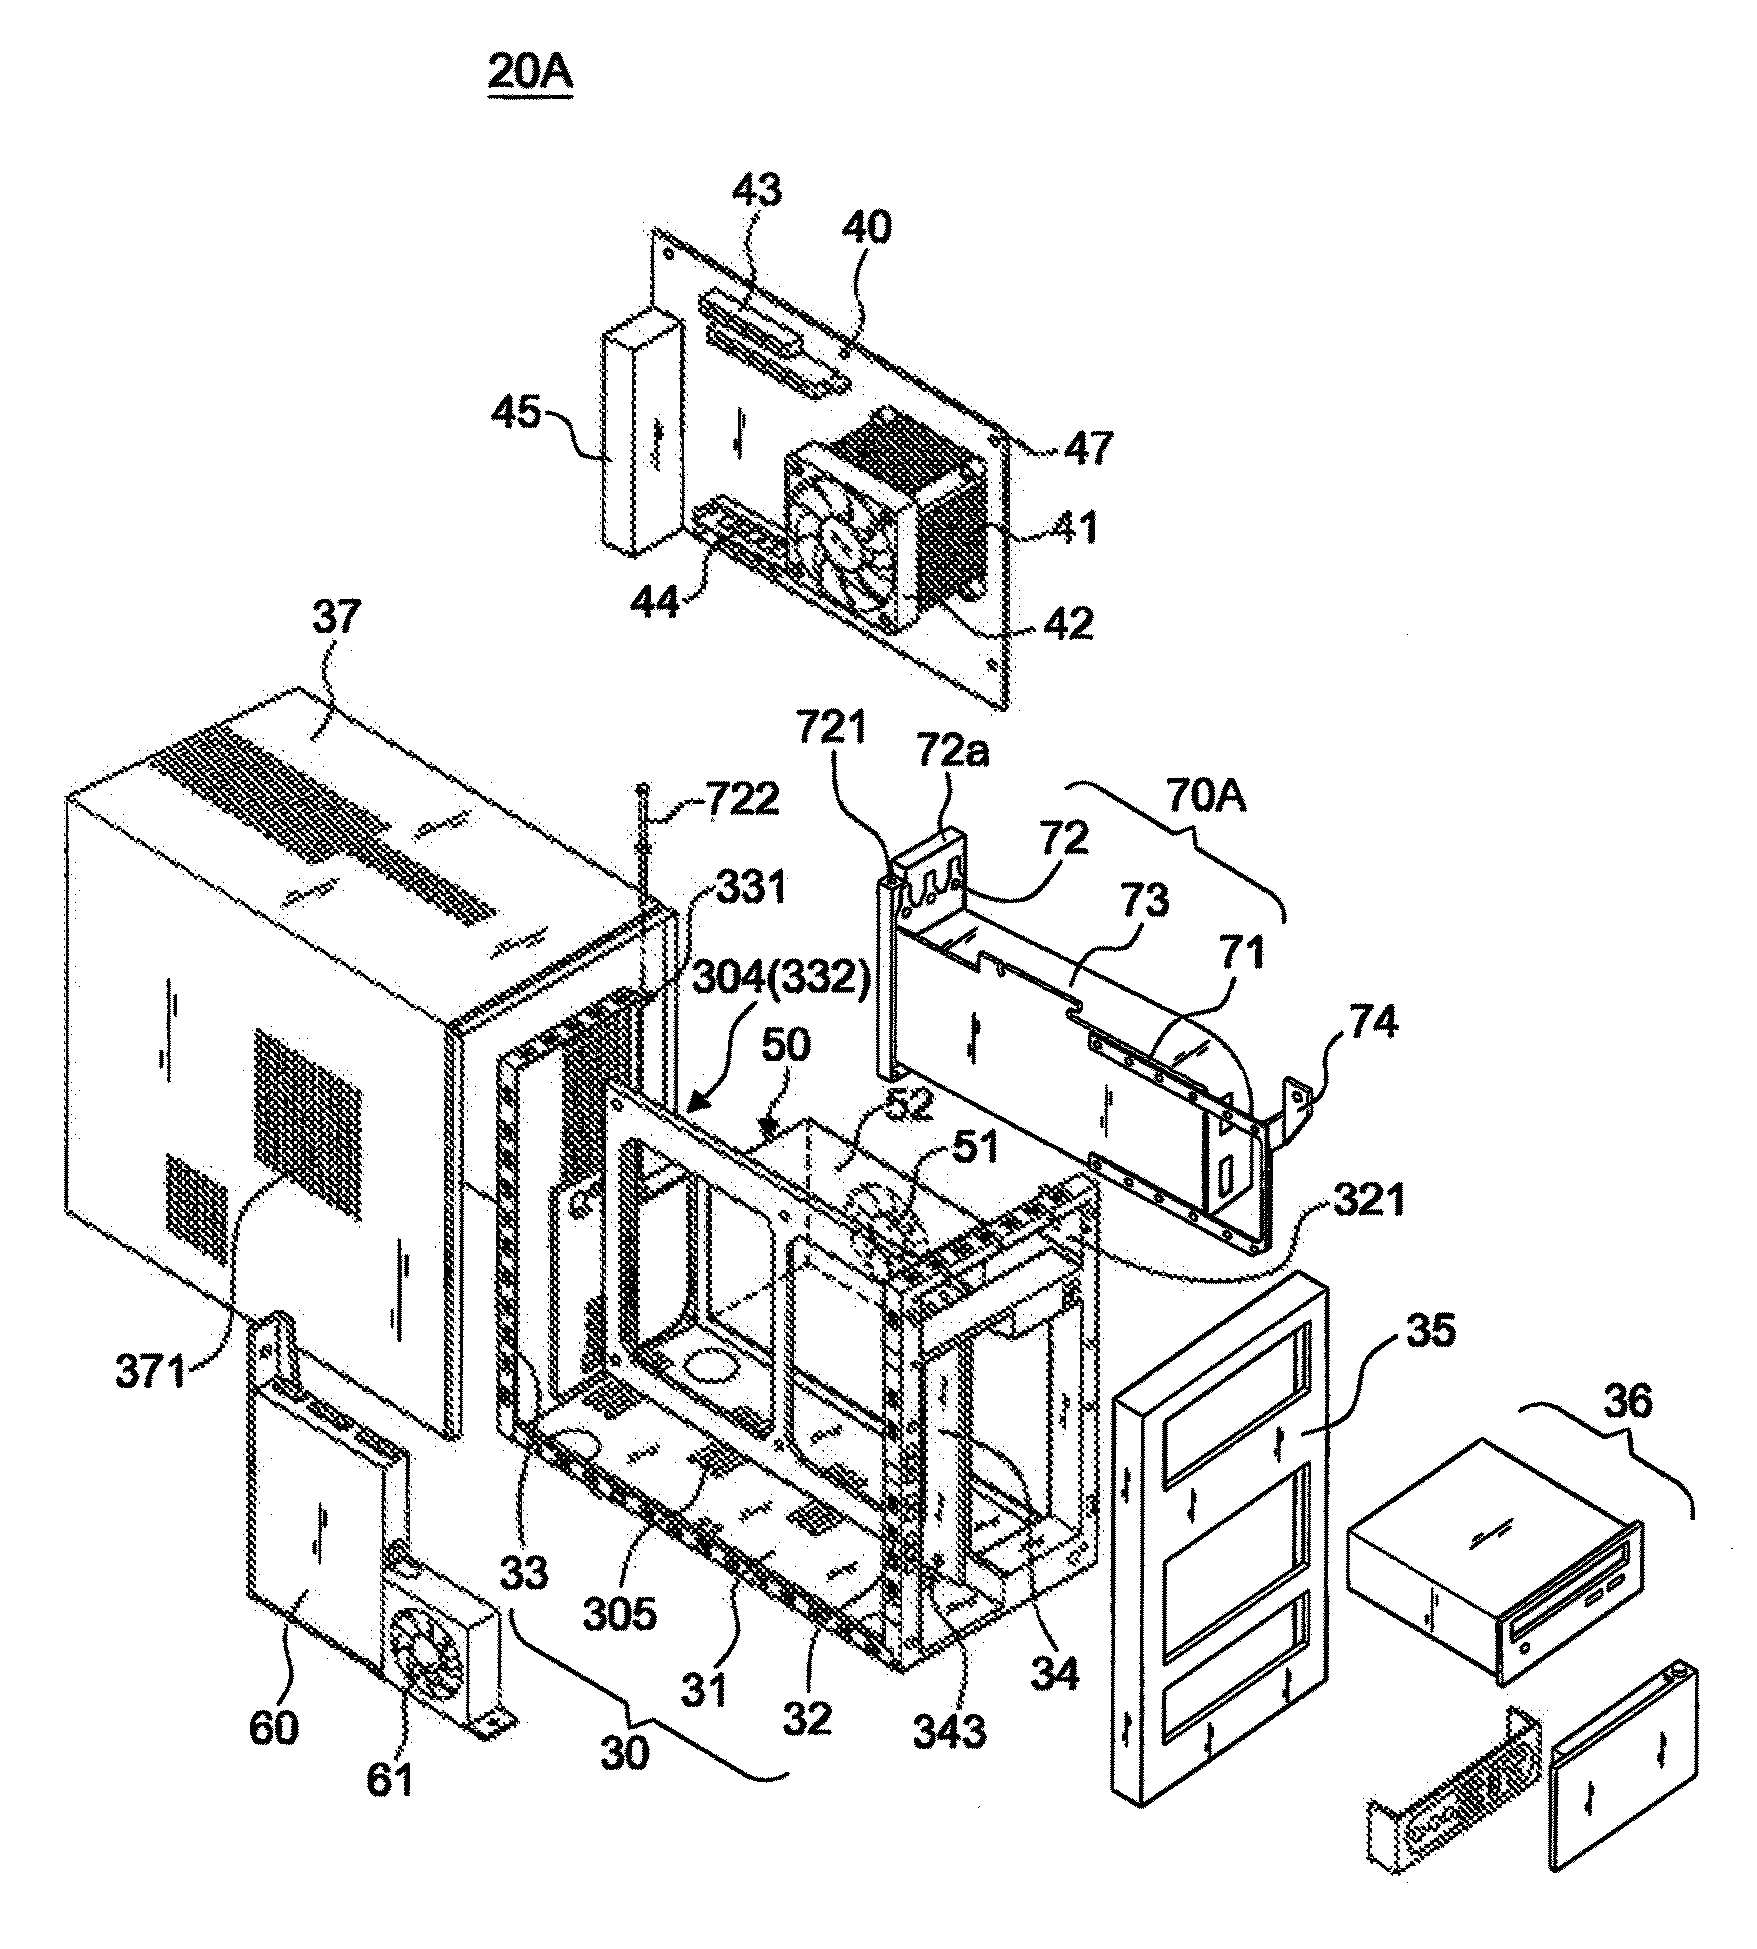 Tower computer system